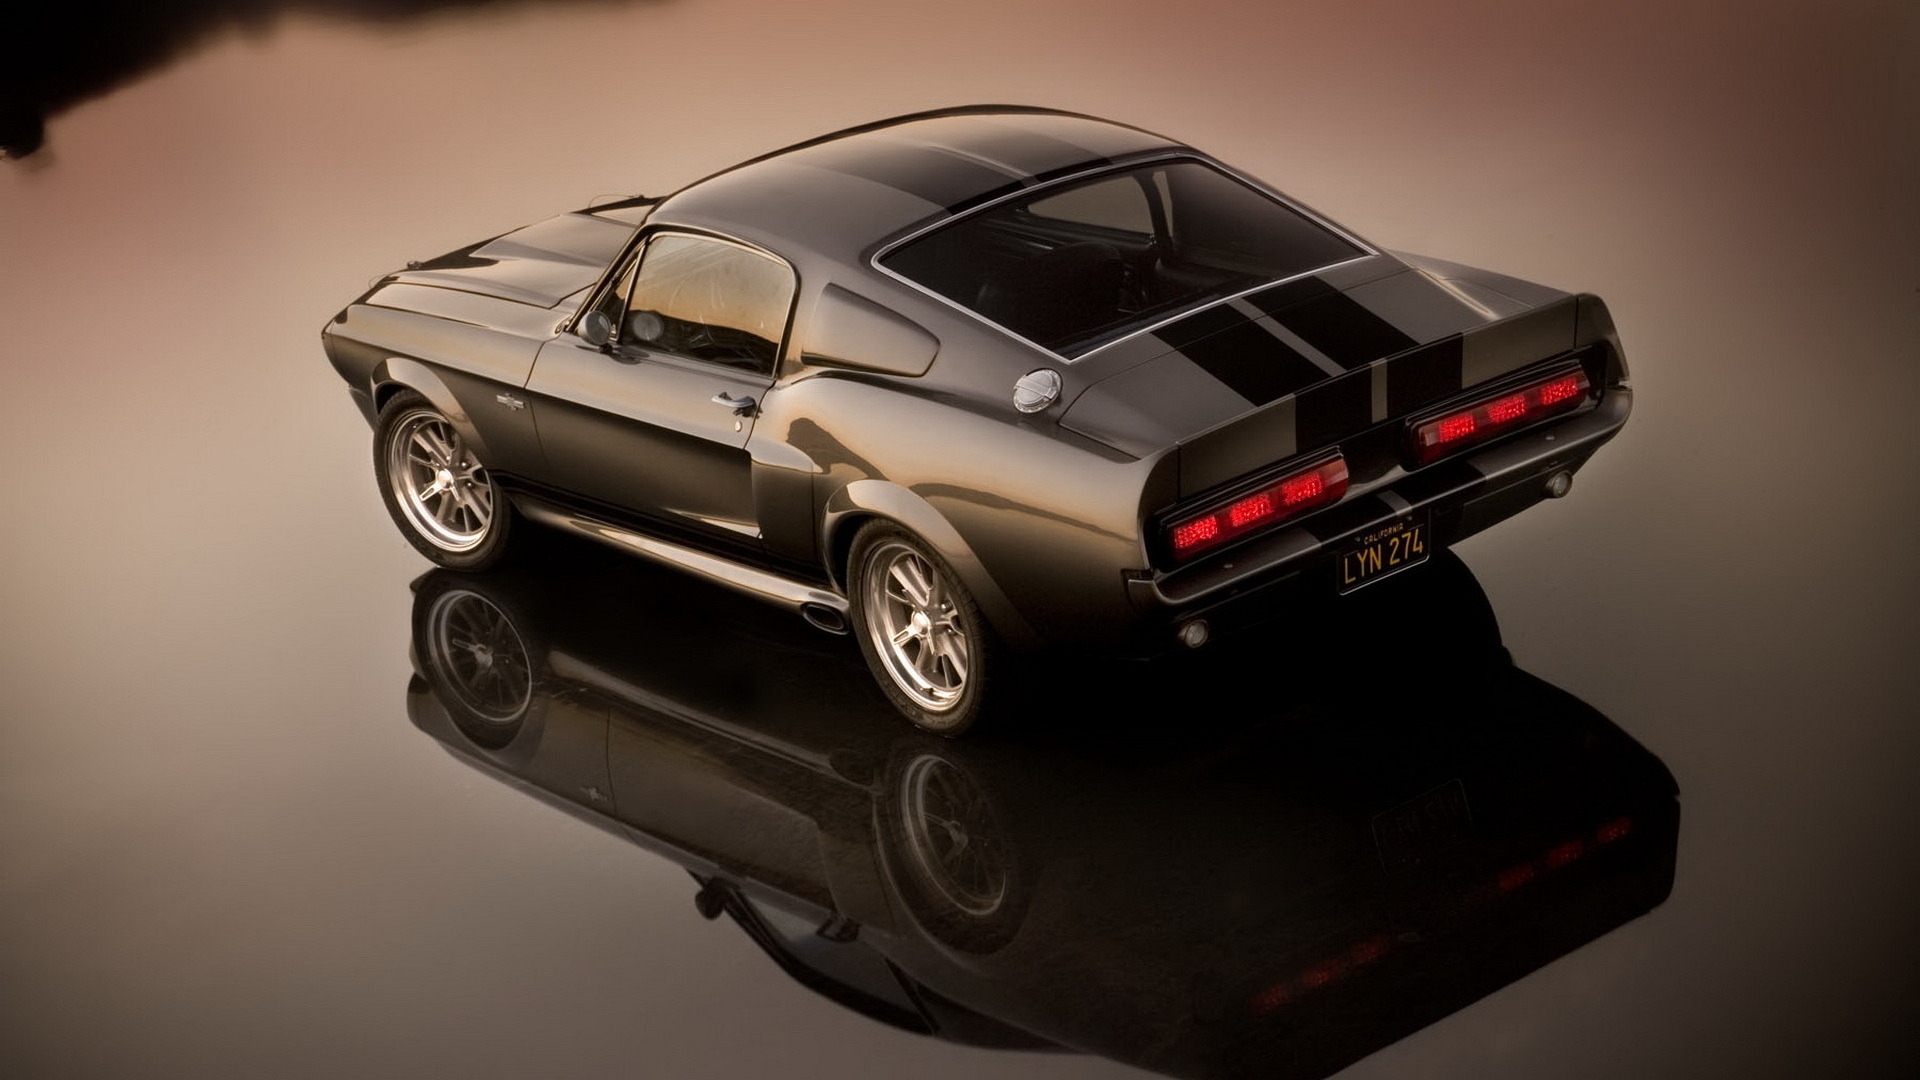 Mustang GT500 for 1920 x 1080 HDTV 1080p resolution